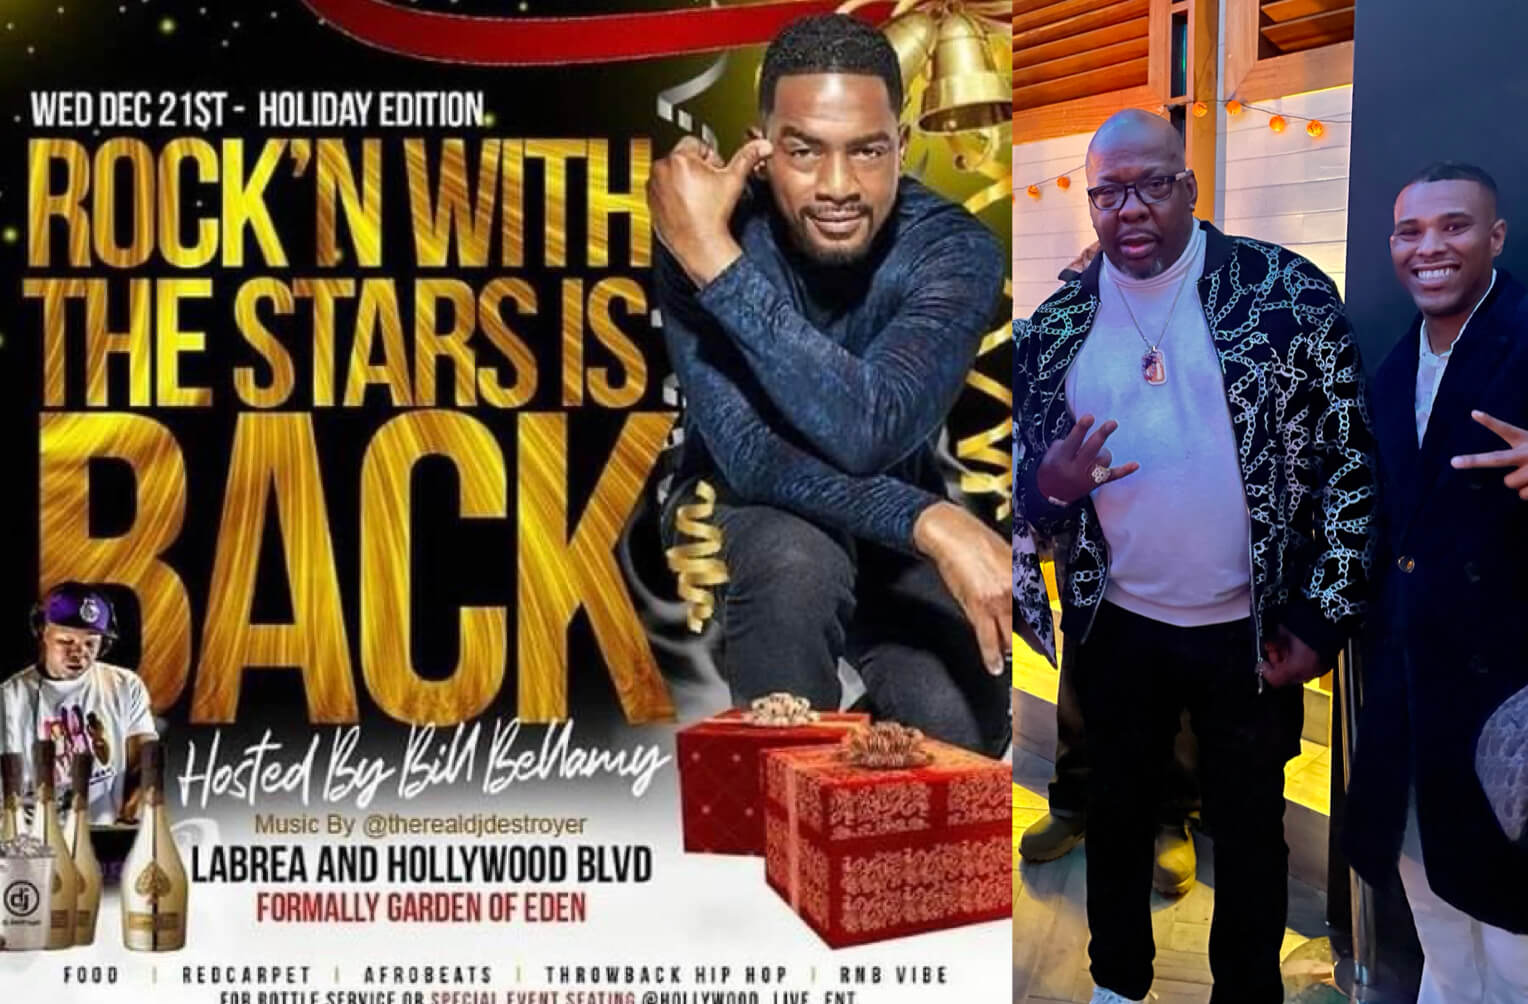 ROCK'N WITH THE STARS - BILL BELLAMY & BOBBY BROWN